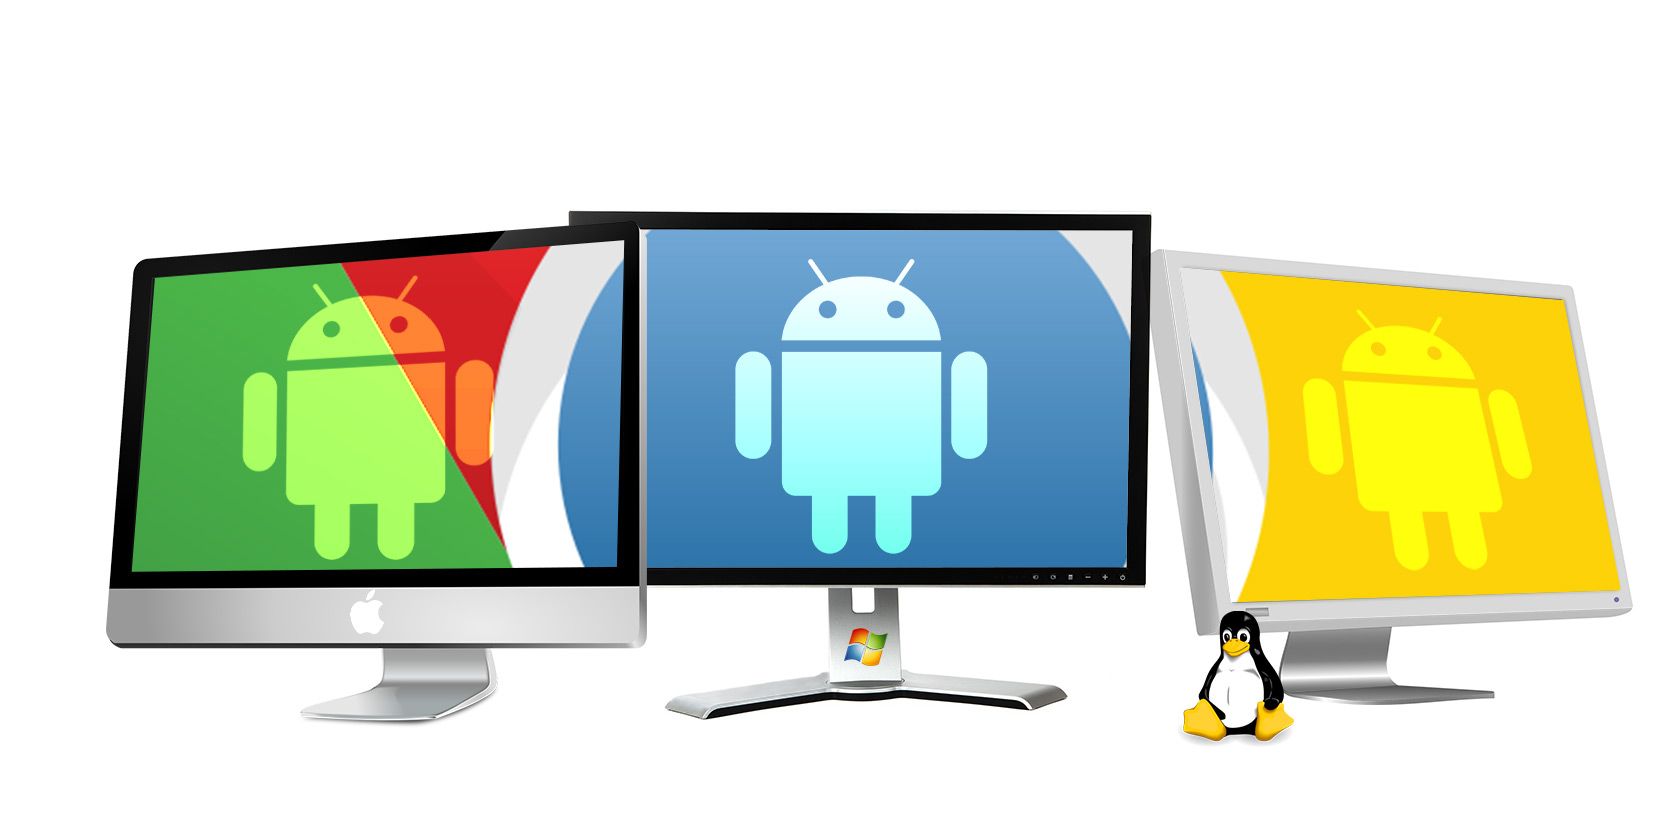 android-apps-chrome-mac-win-linux